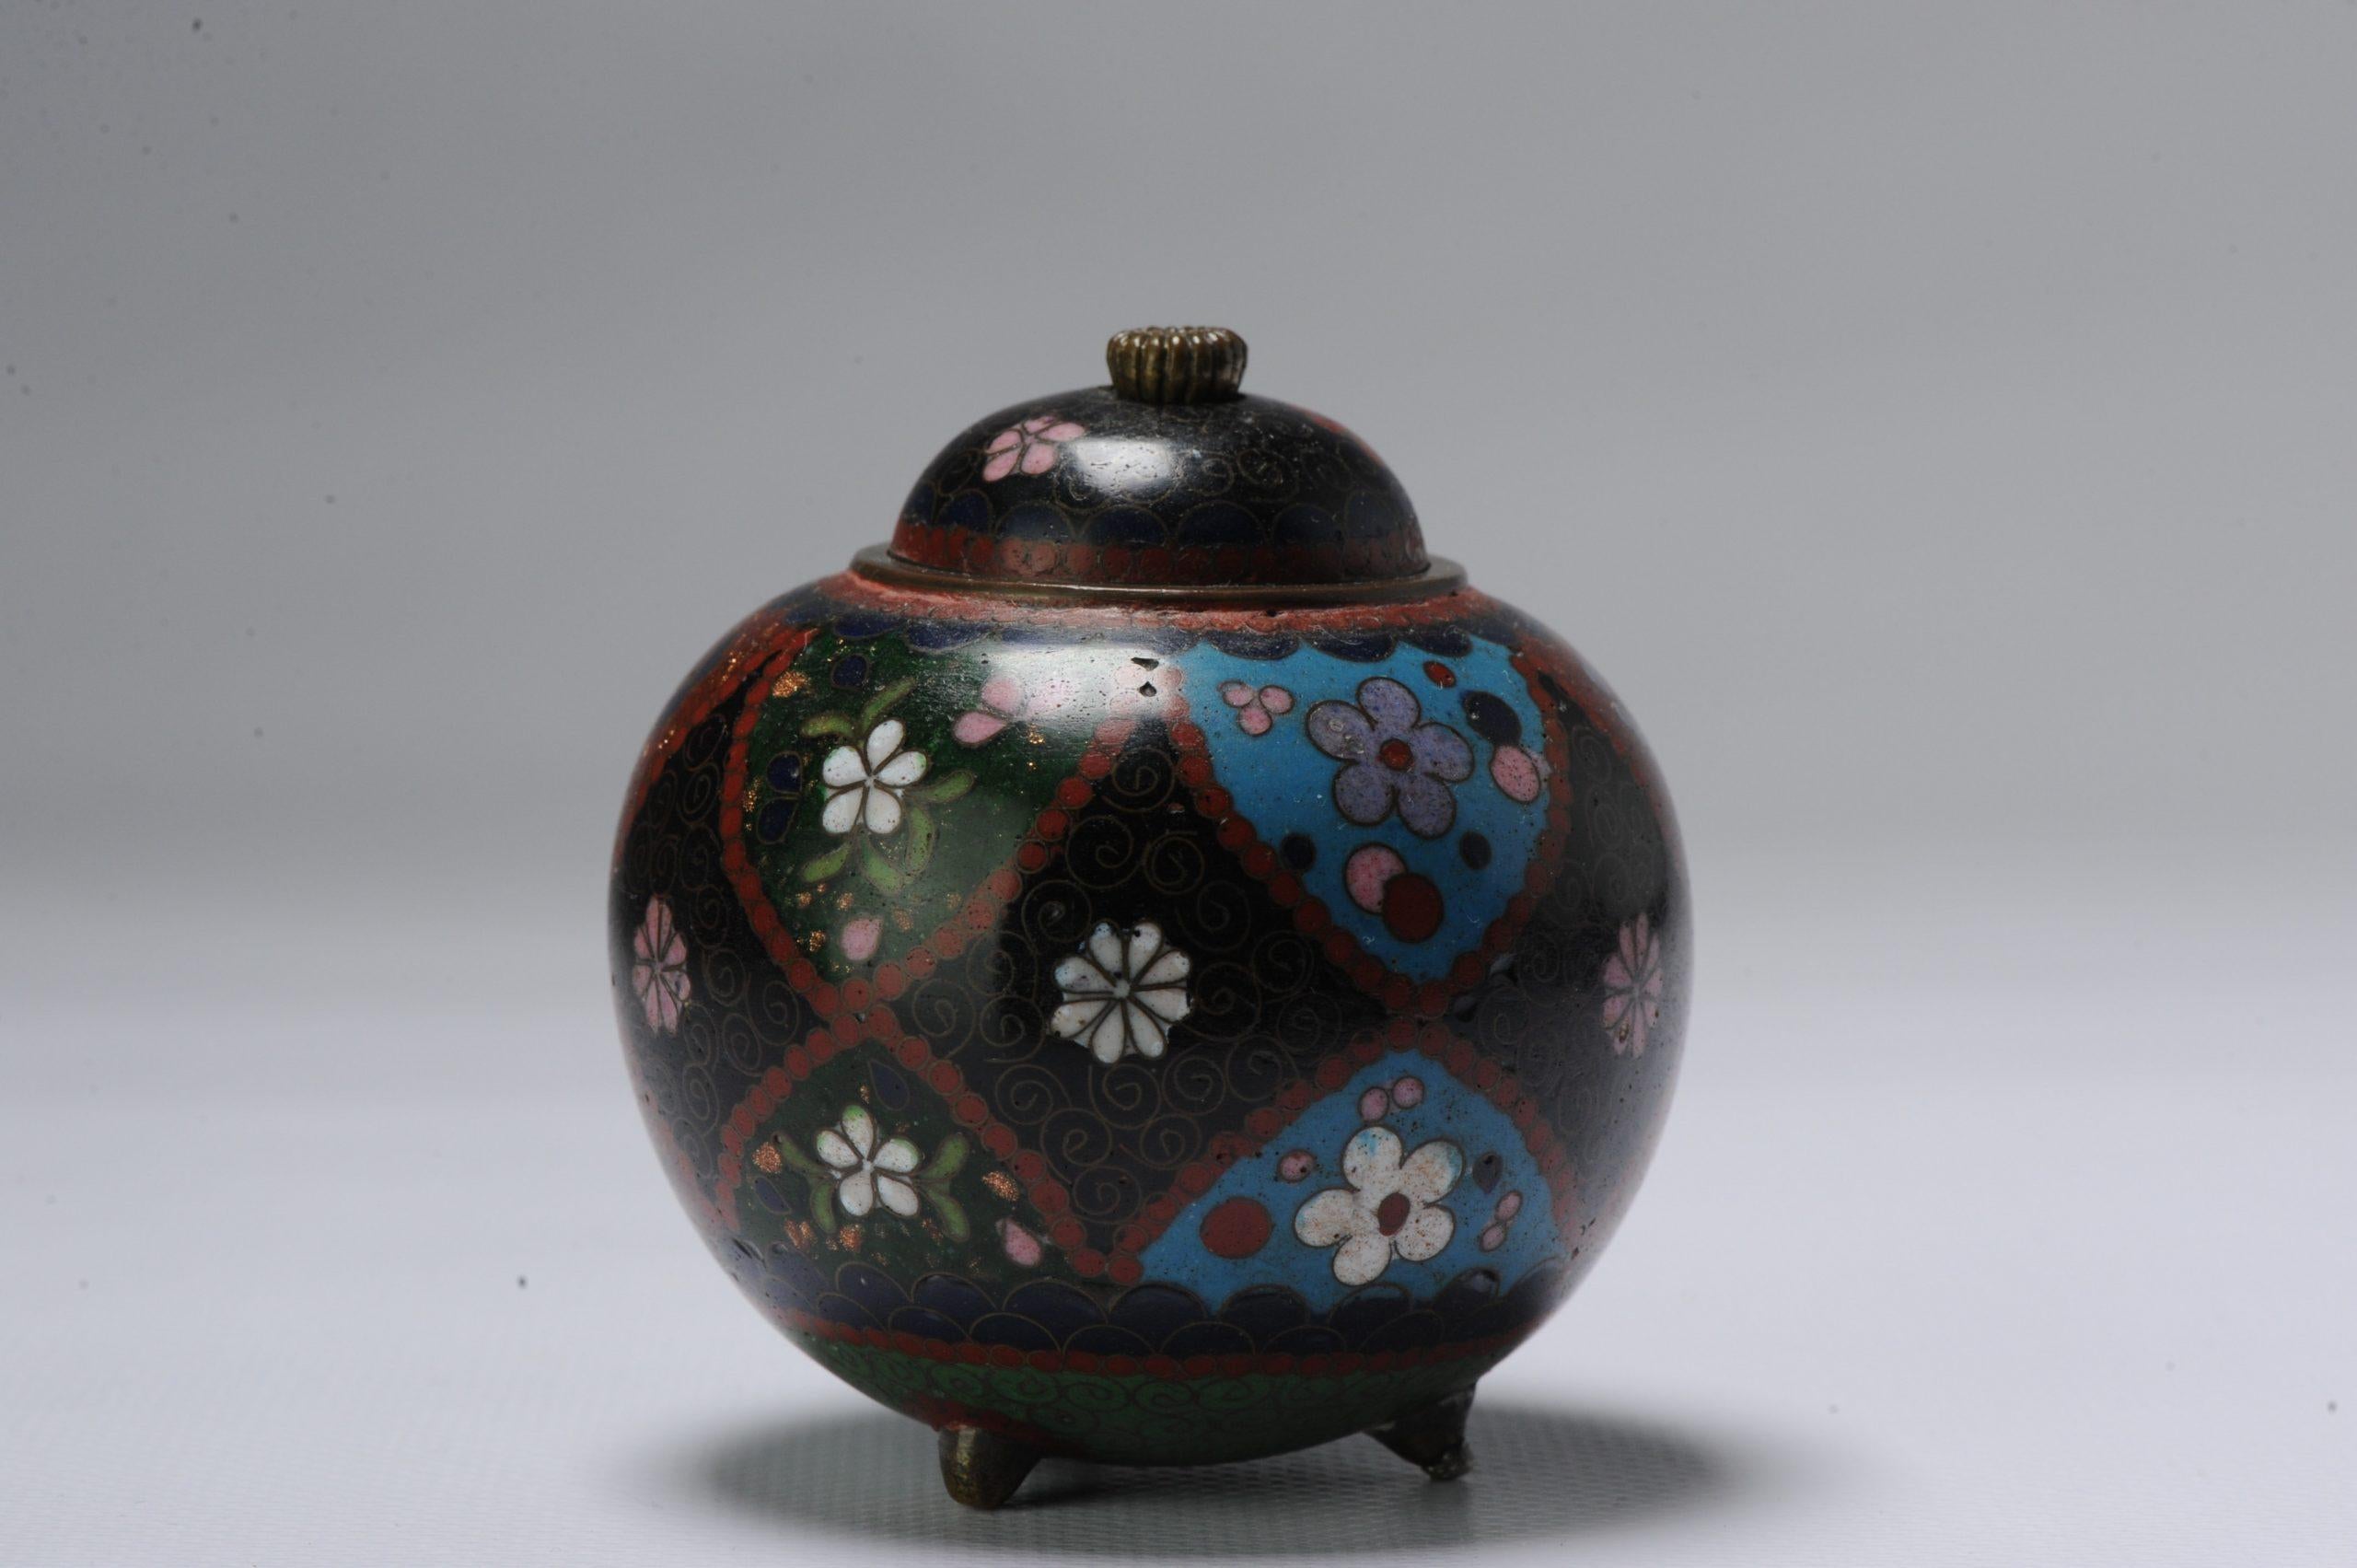 Lovely 19c Antique Meiji Period Japanese Koro Bronze Cloisonne In Good Condition For Sale In Amsterdam, Noord Holland